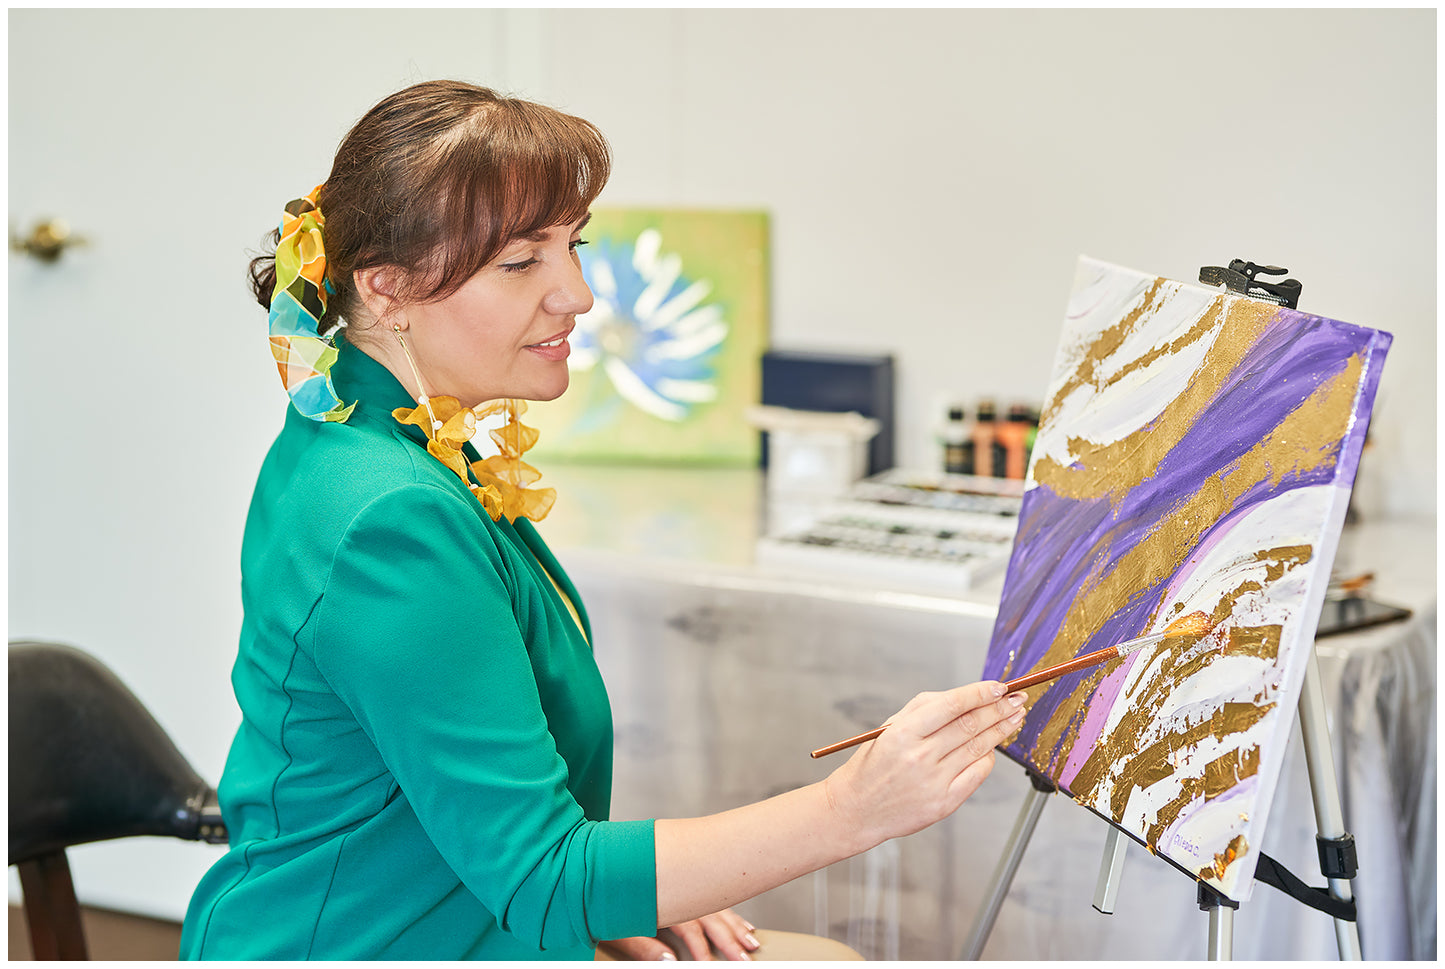 Art-A-Porte Party Sunday at 1 pm. Minimalist Abstract Modern Painting On Canvas Applying Gold Foil With Artist Alesia Chaika